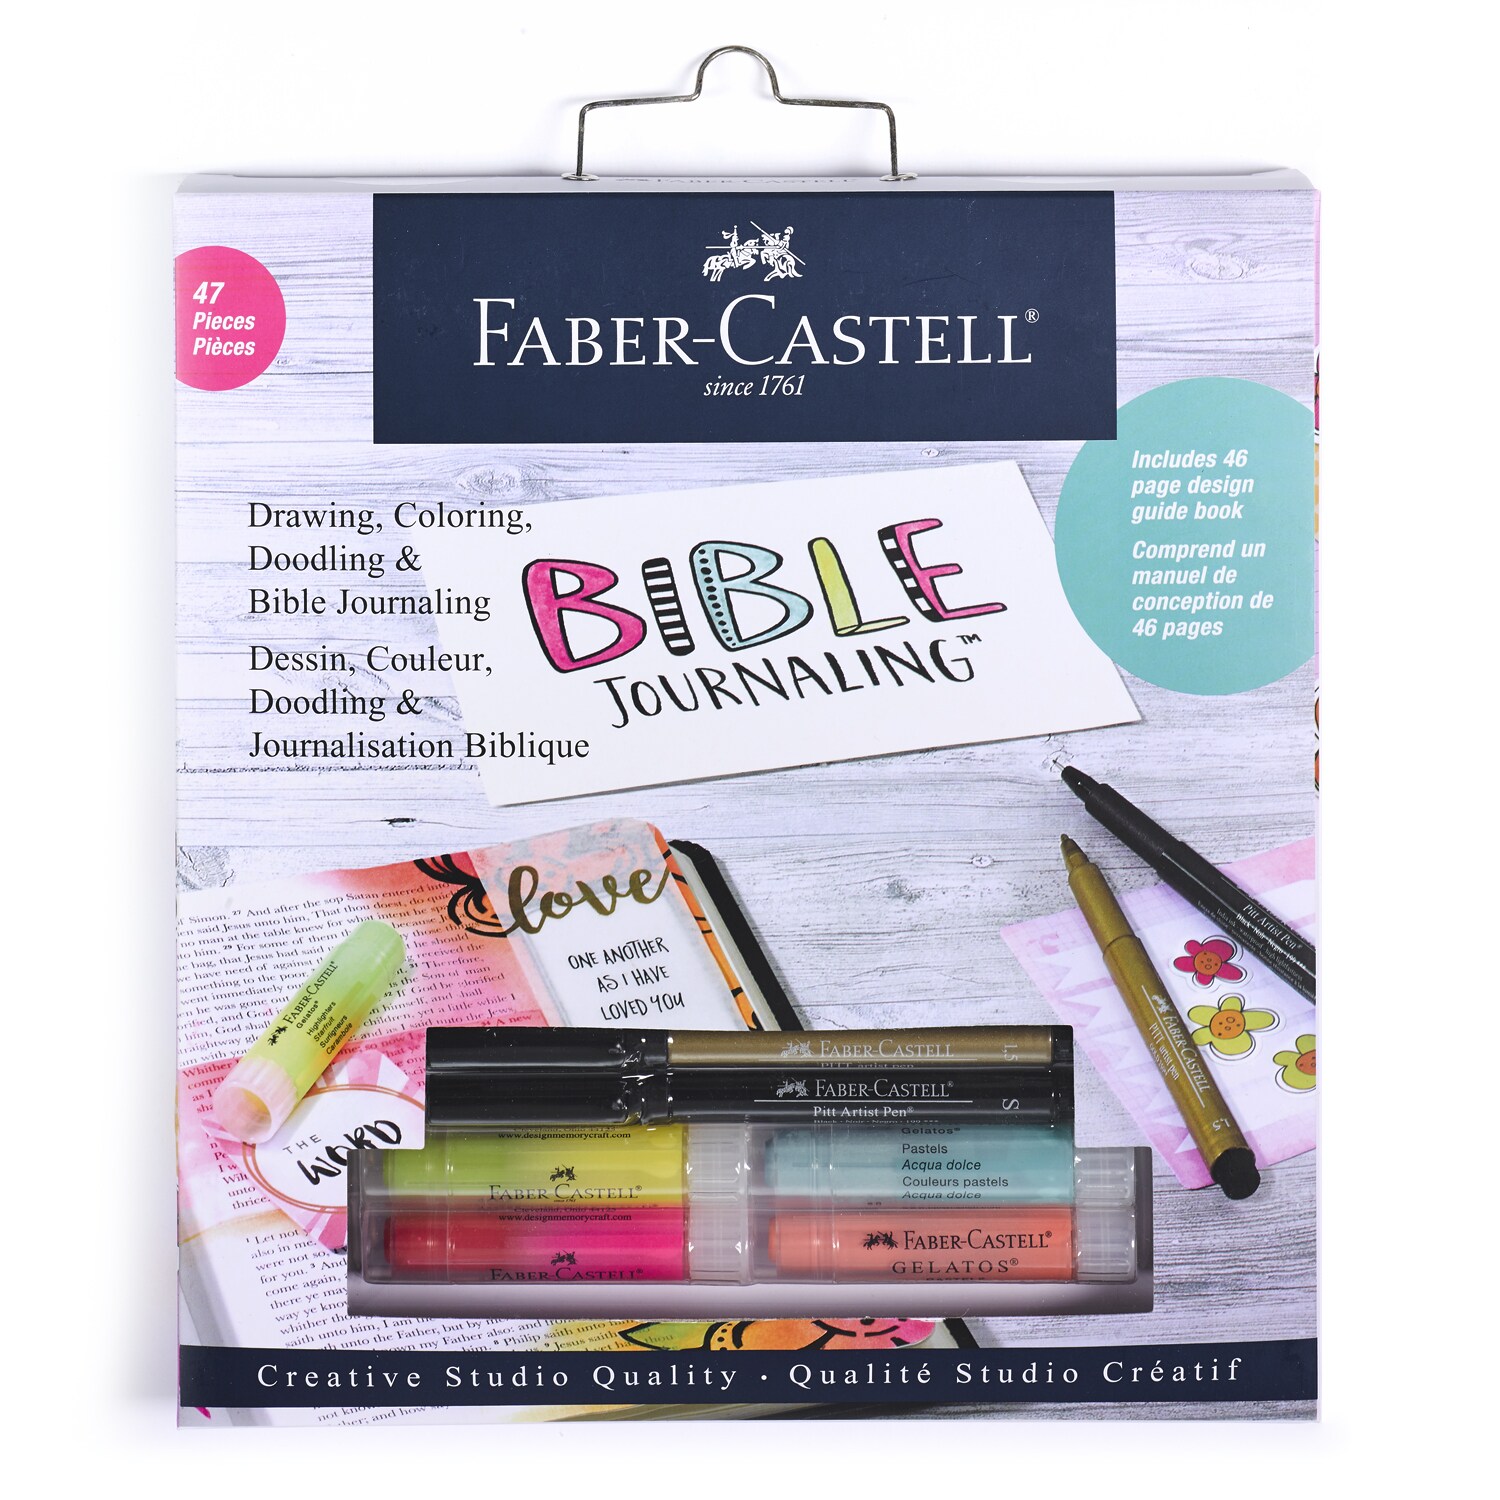 Faber-Castell Bible Journaling Kit - Includes Die Cuts, Stickers